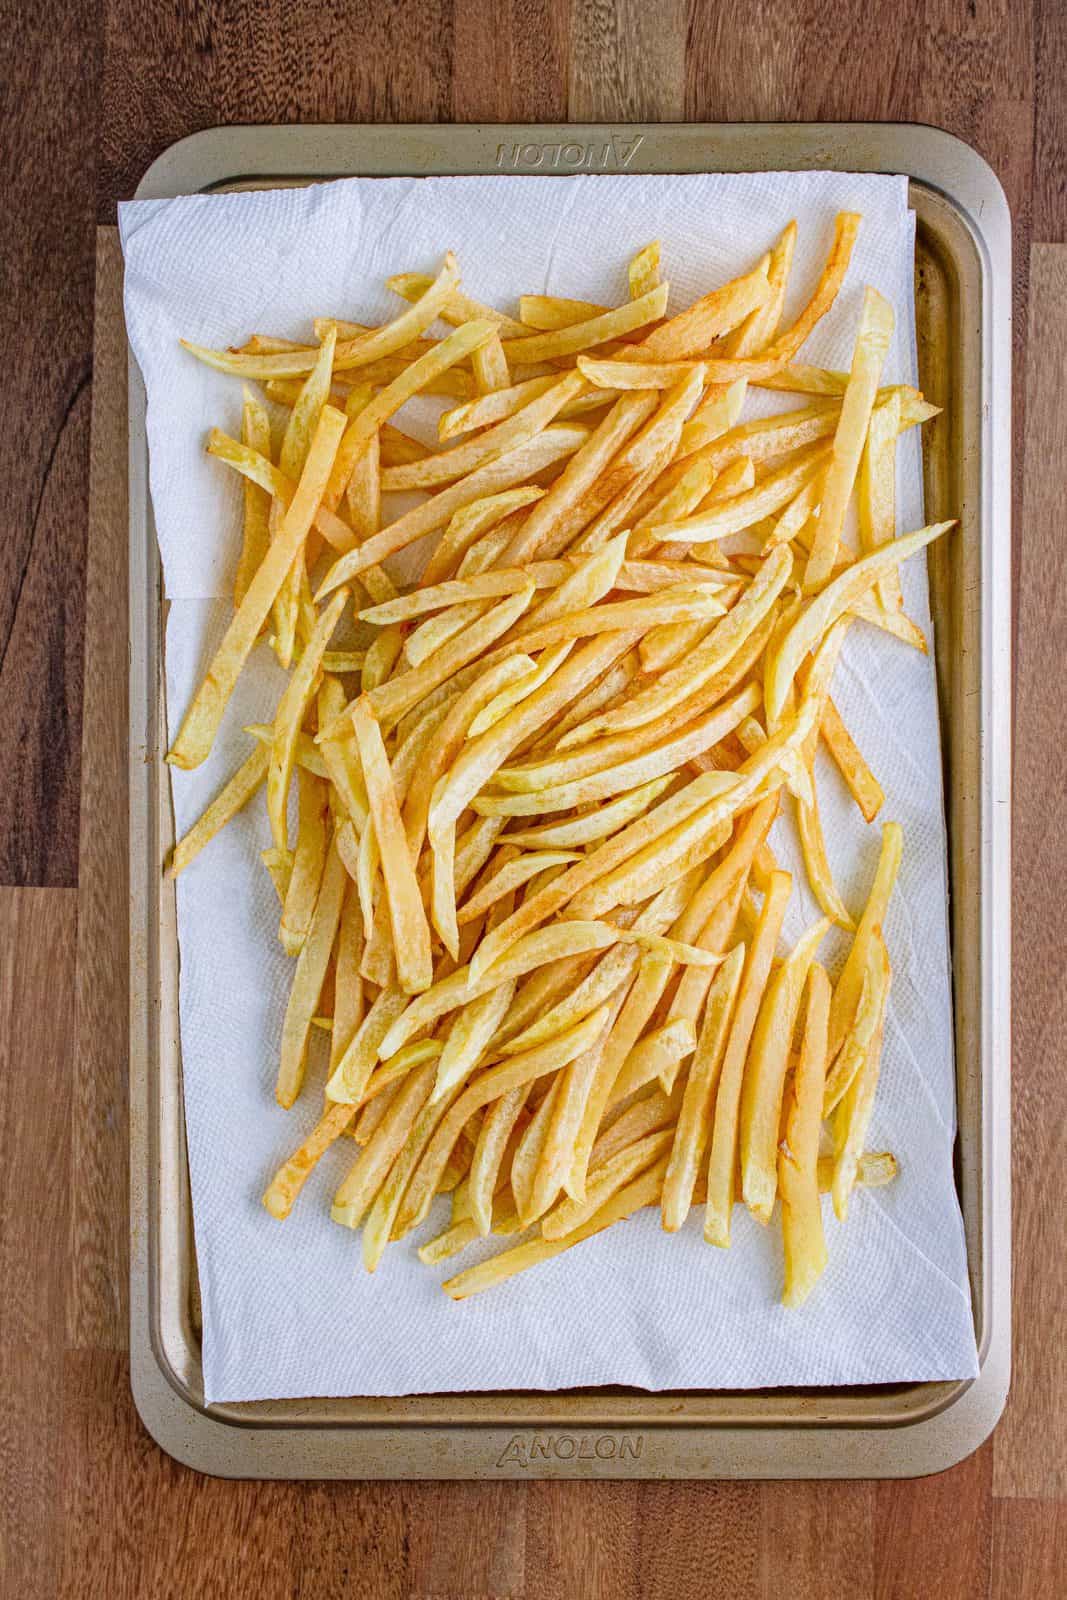 partially cooked French fries on a paper towel to drain excess oil